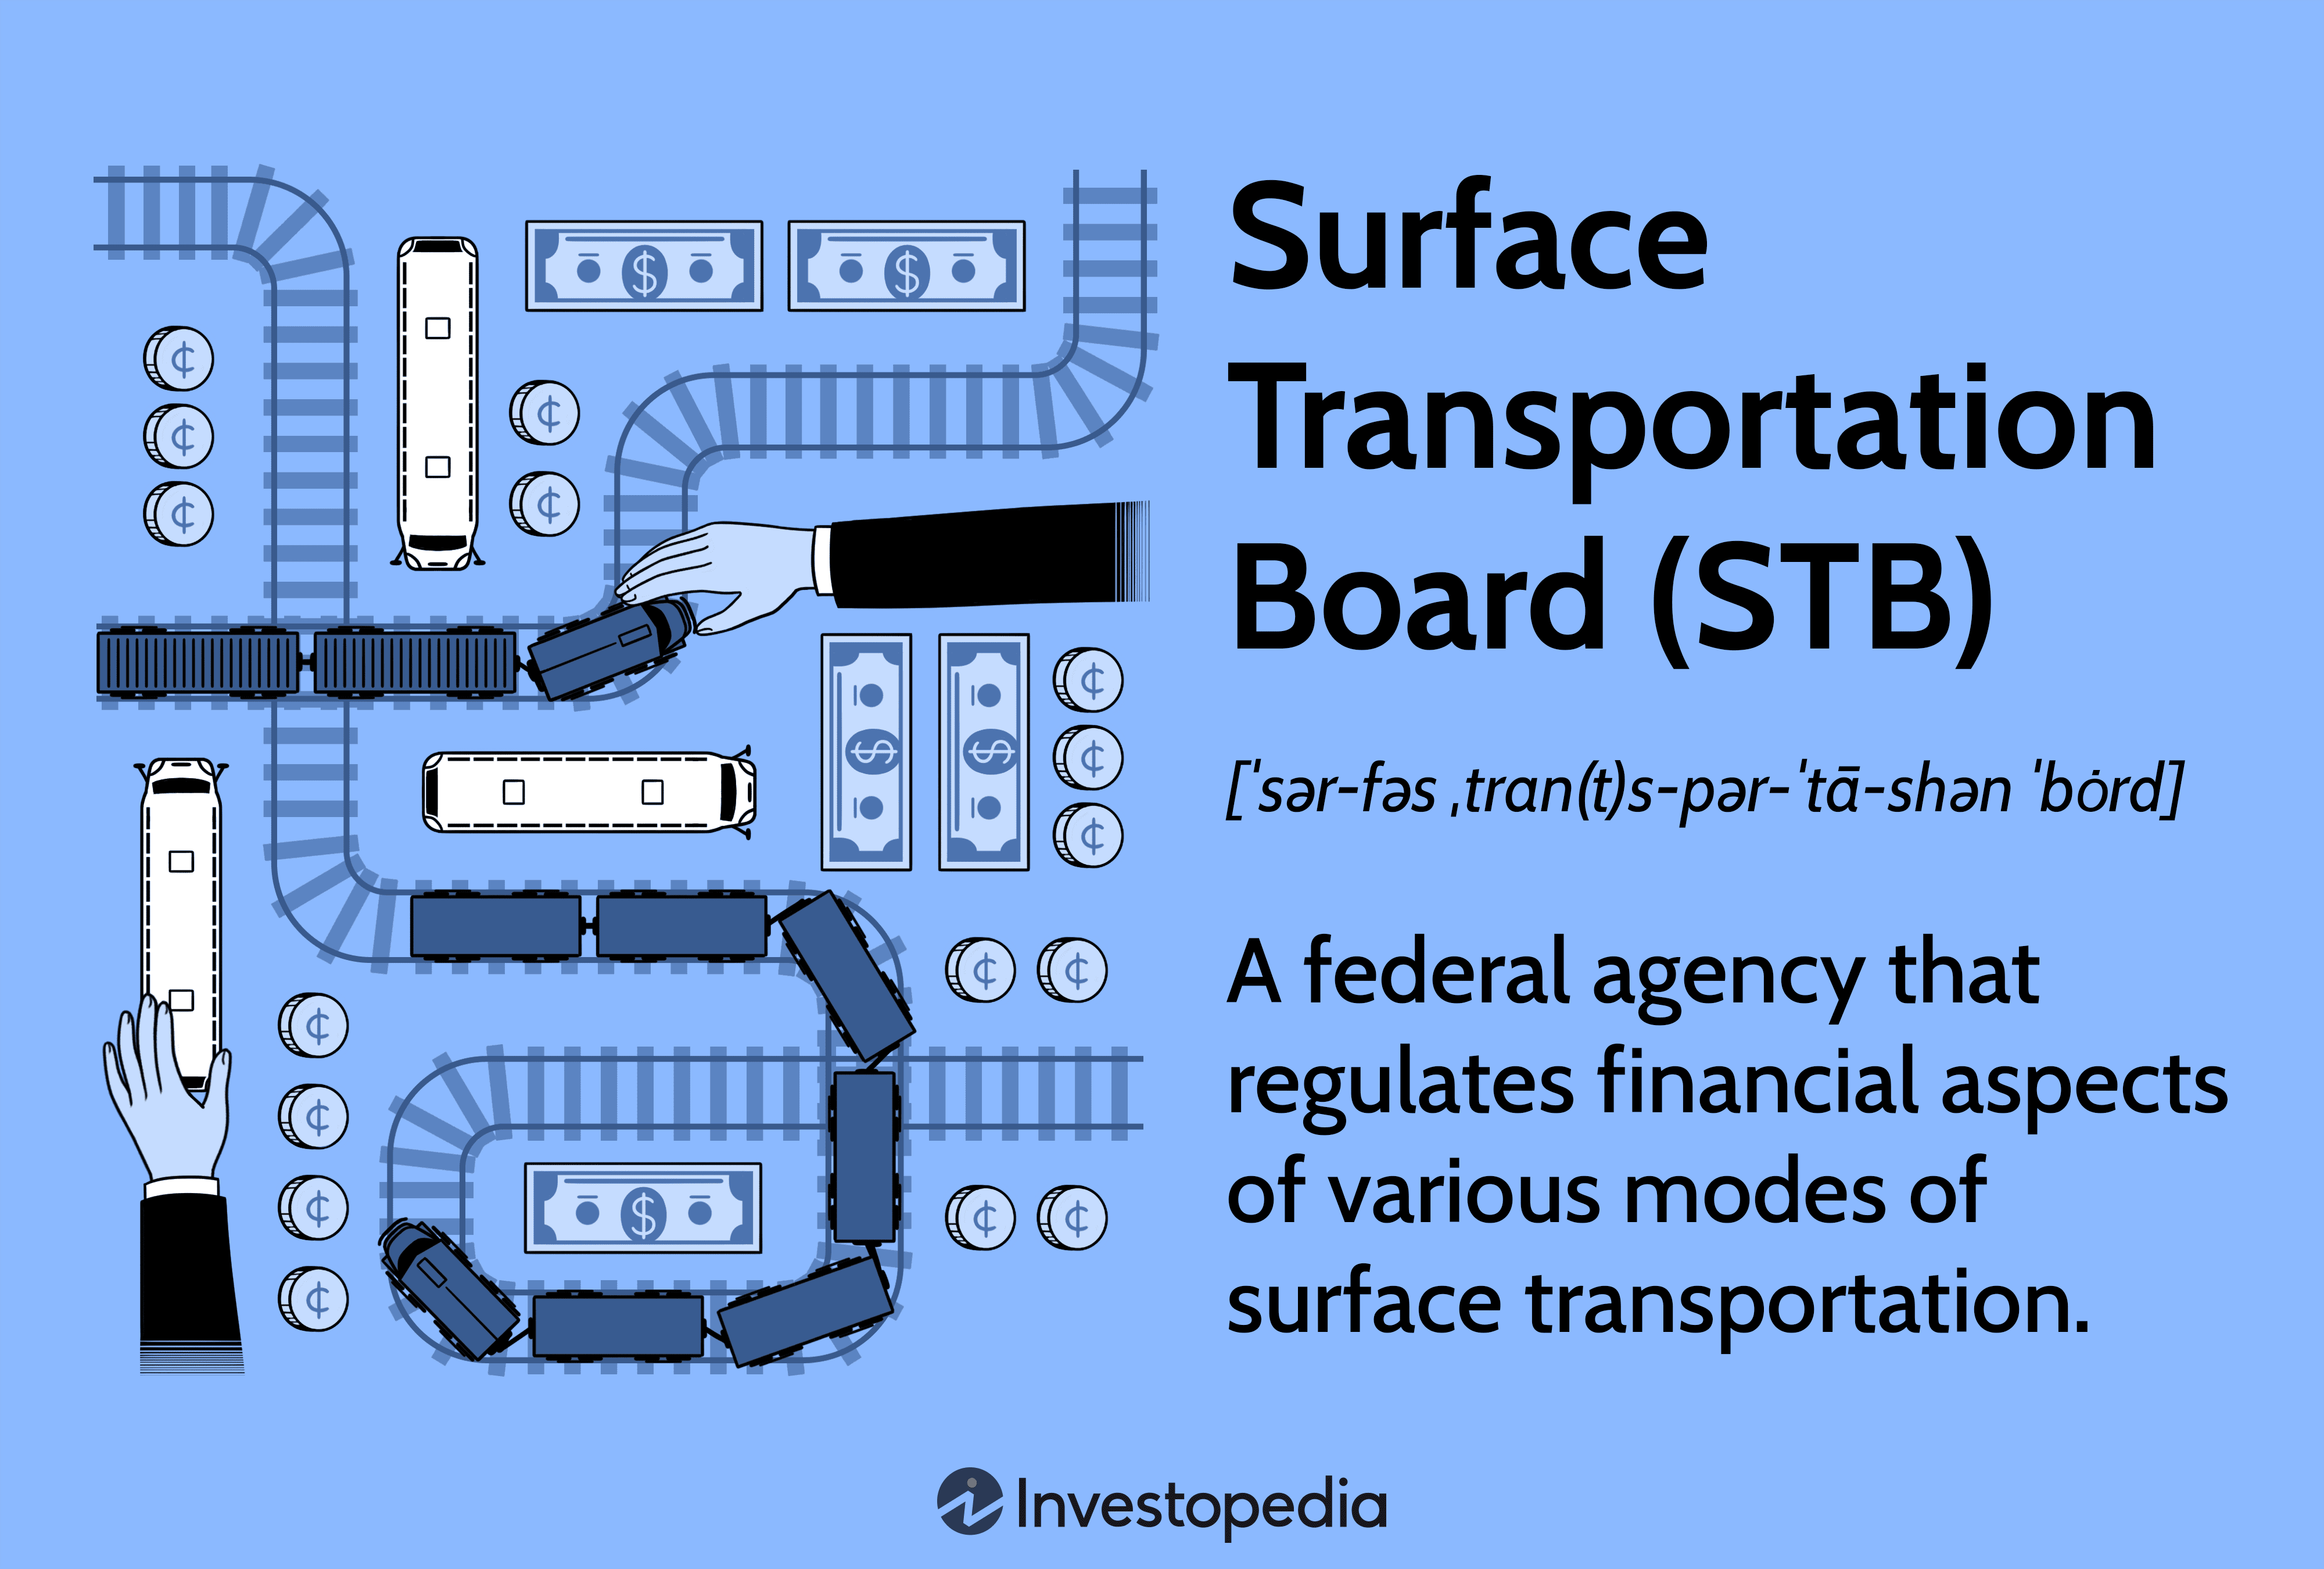 Surface Transportation Board (STB): A federal agency that regulates financial aspects of various modes of surface transportation.